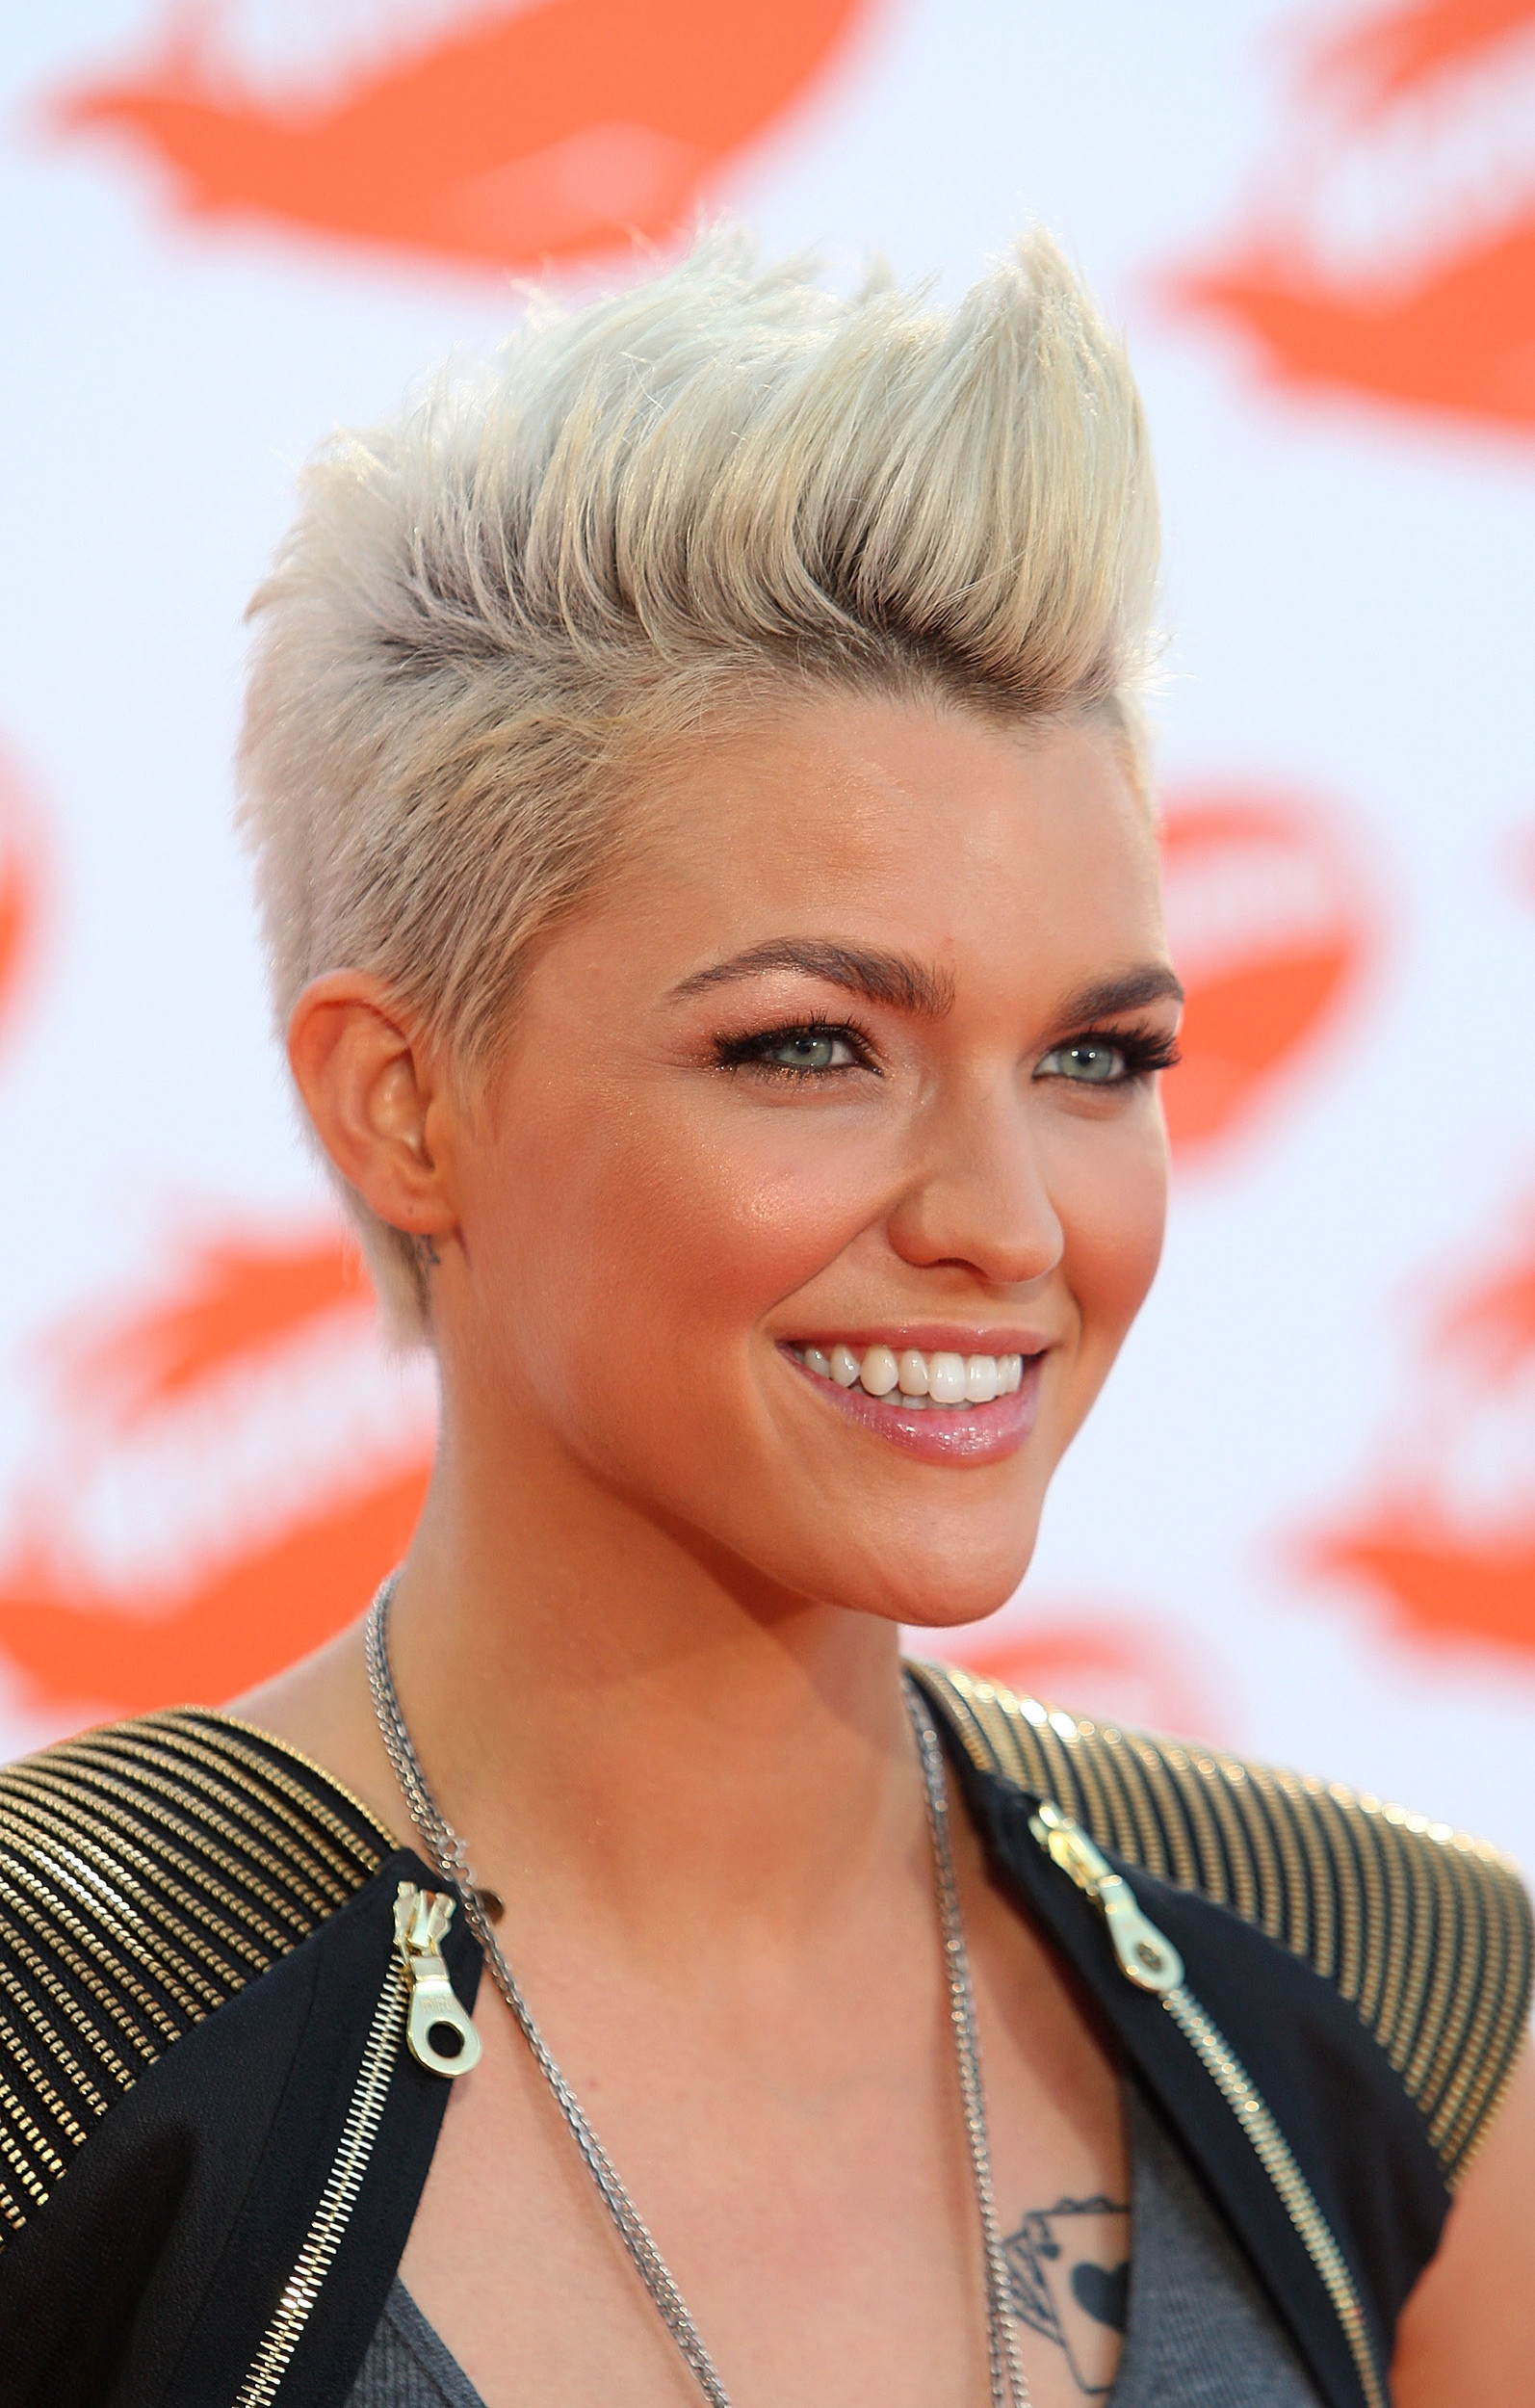 Mohawk Hairstyles Women
 15 Gorgeous Mohawk Hairstyles for Women this Year